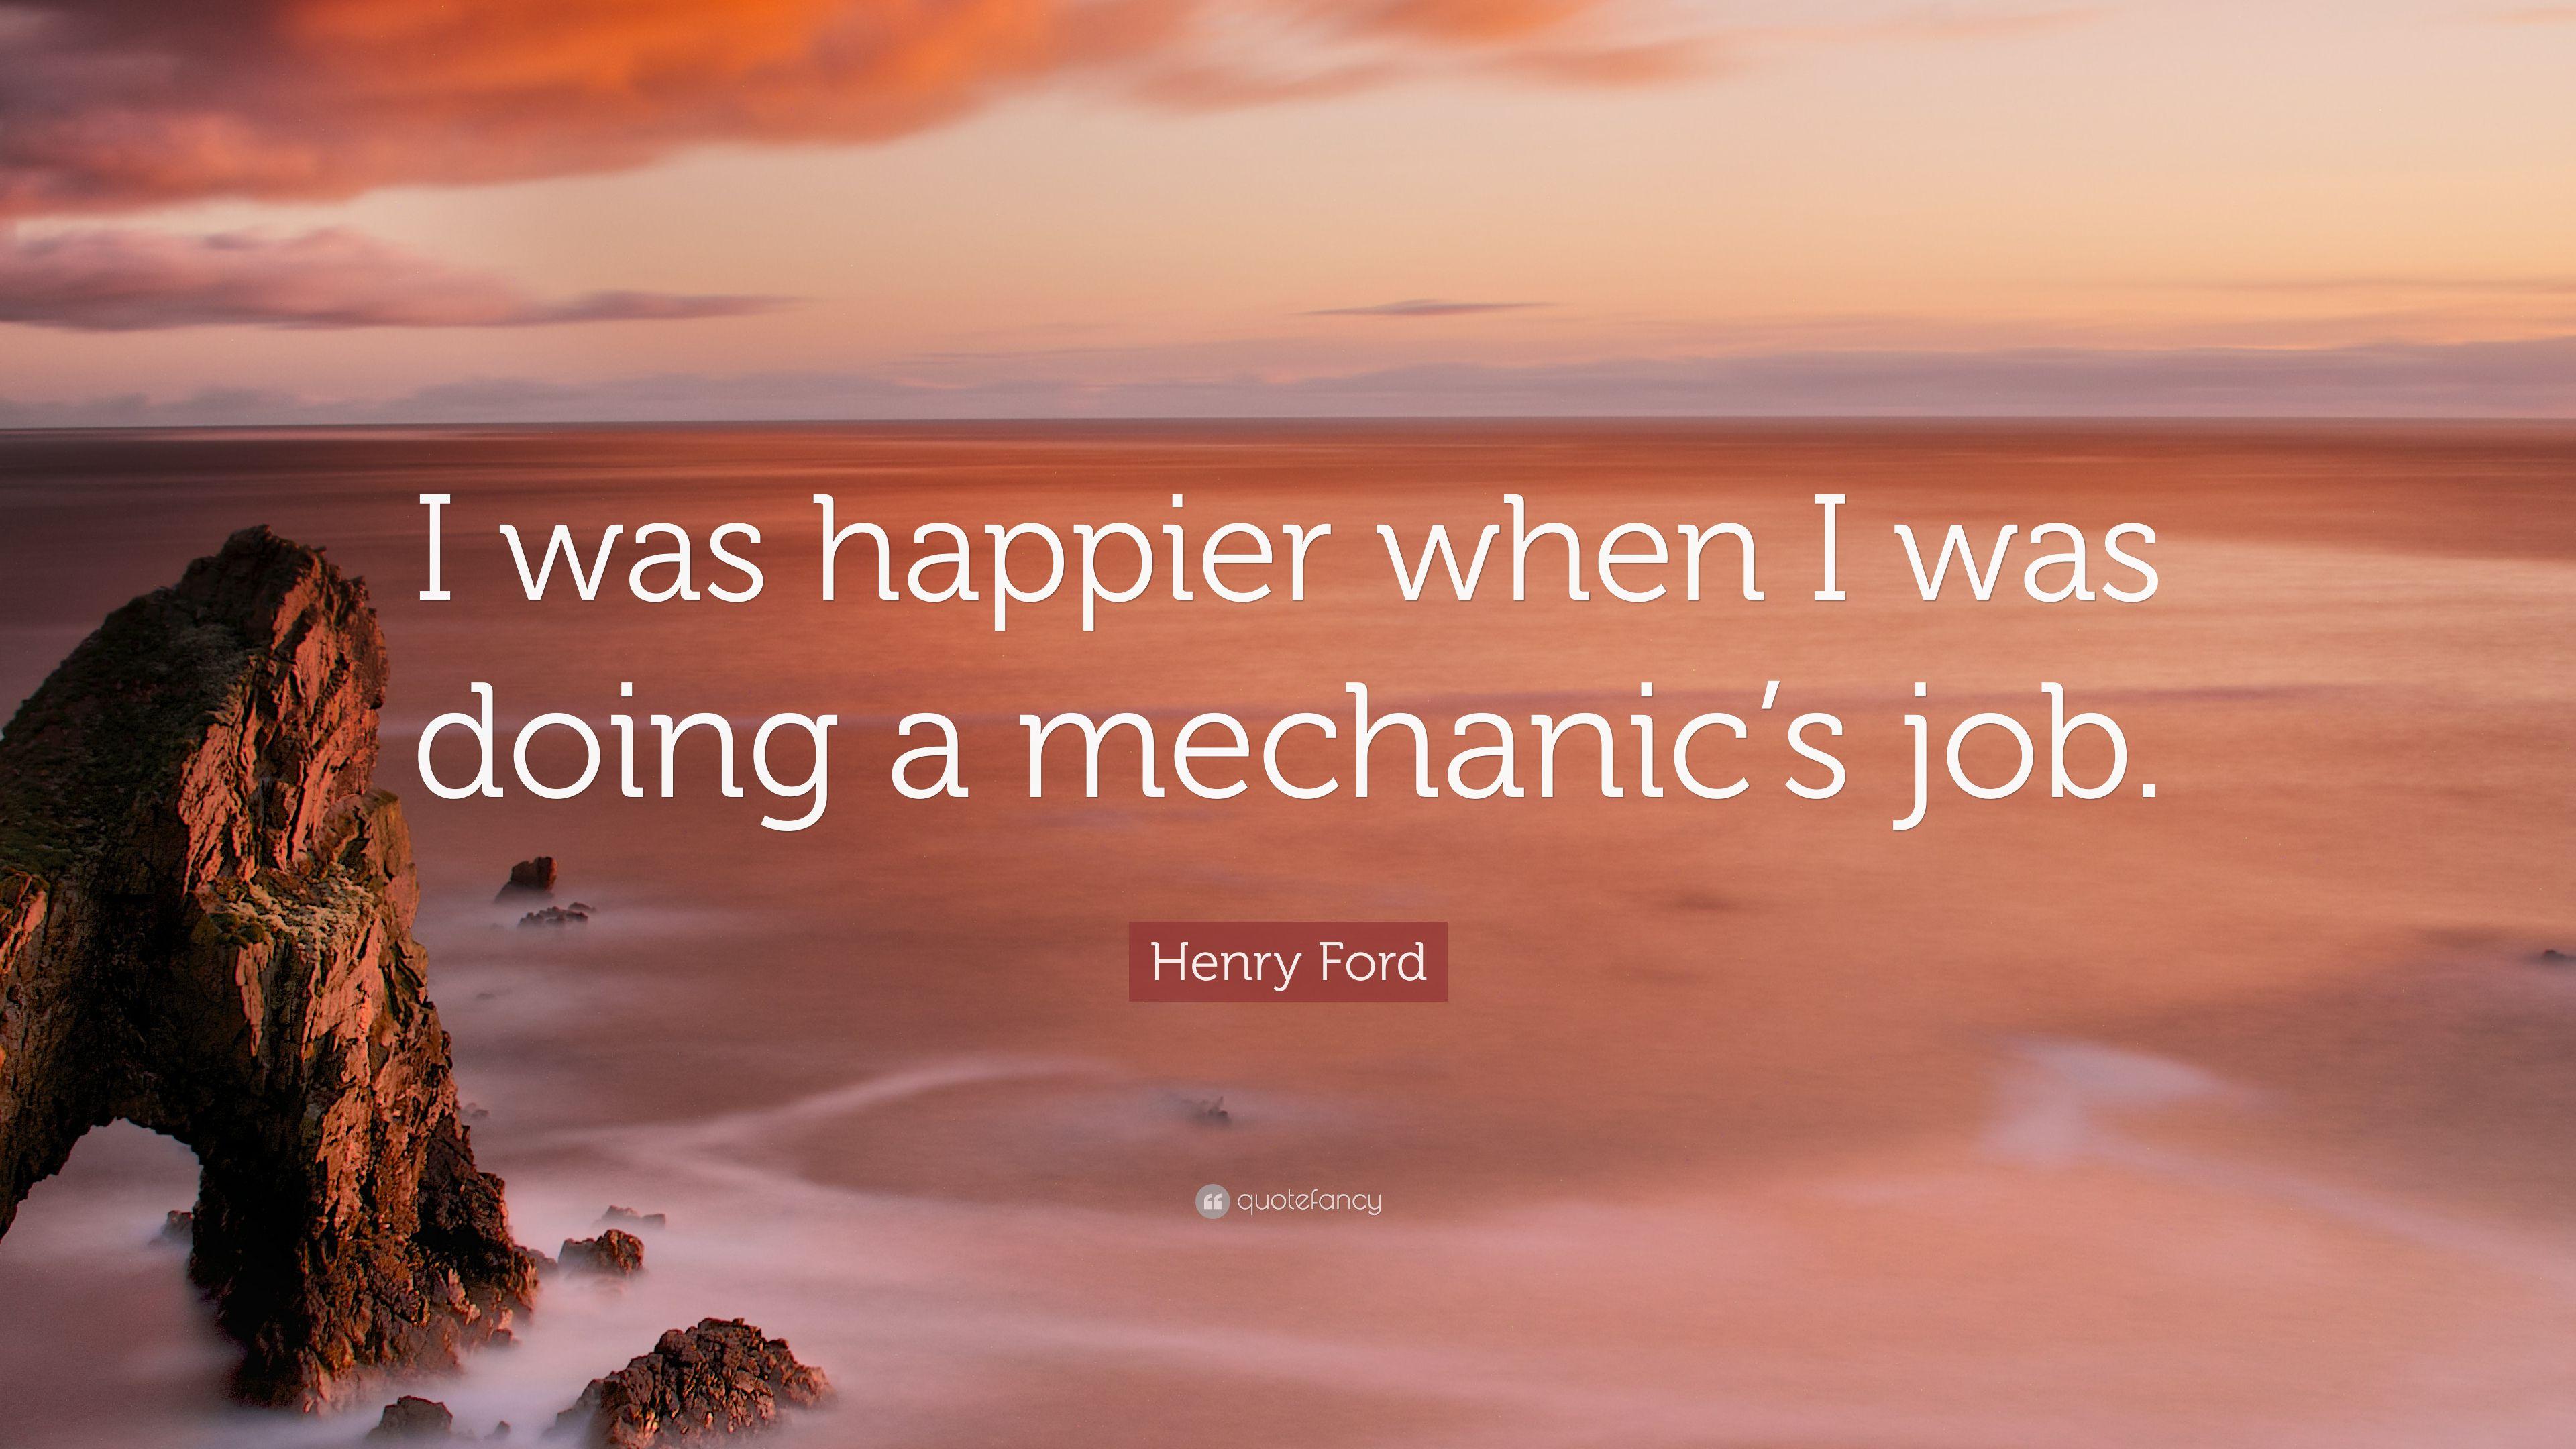 Henry Ford Quote: “I was happier when I was doing a mechanic's job